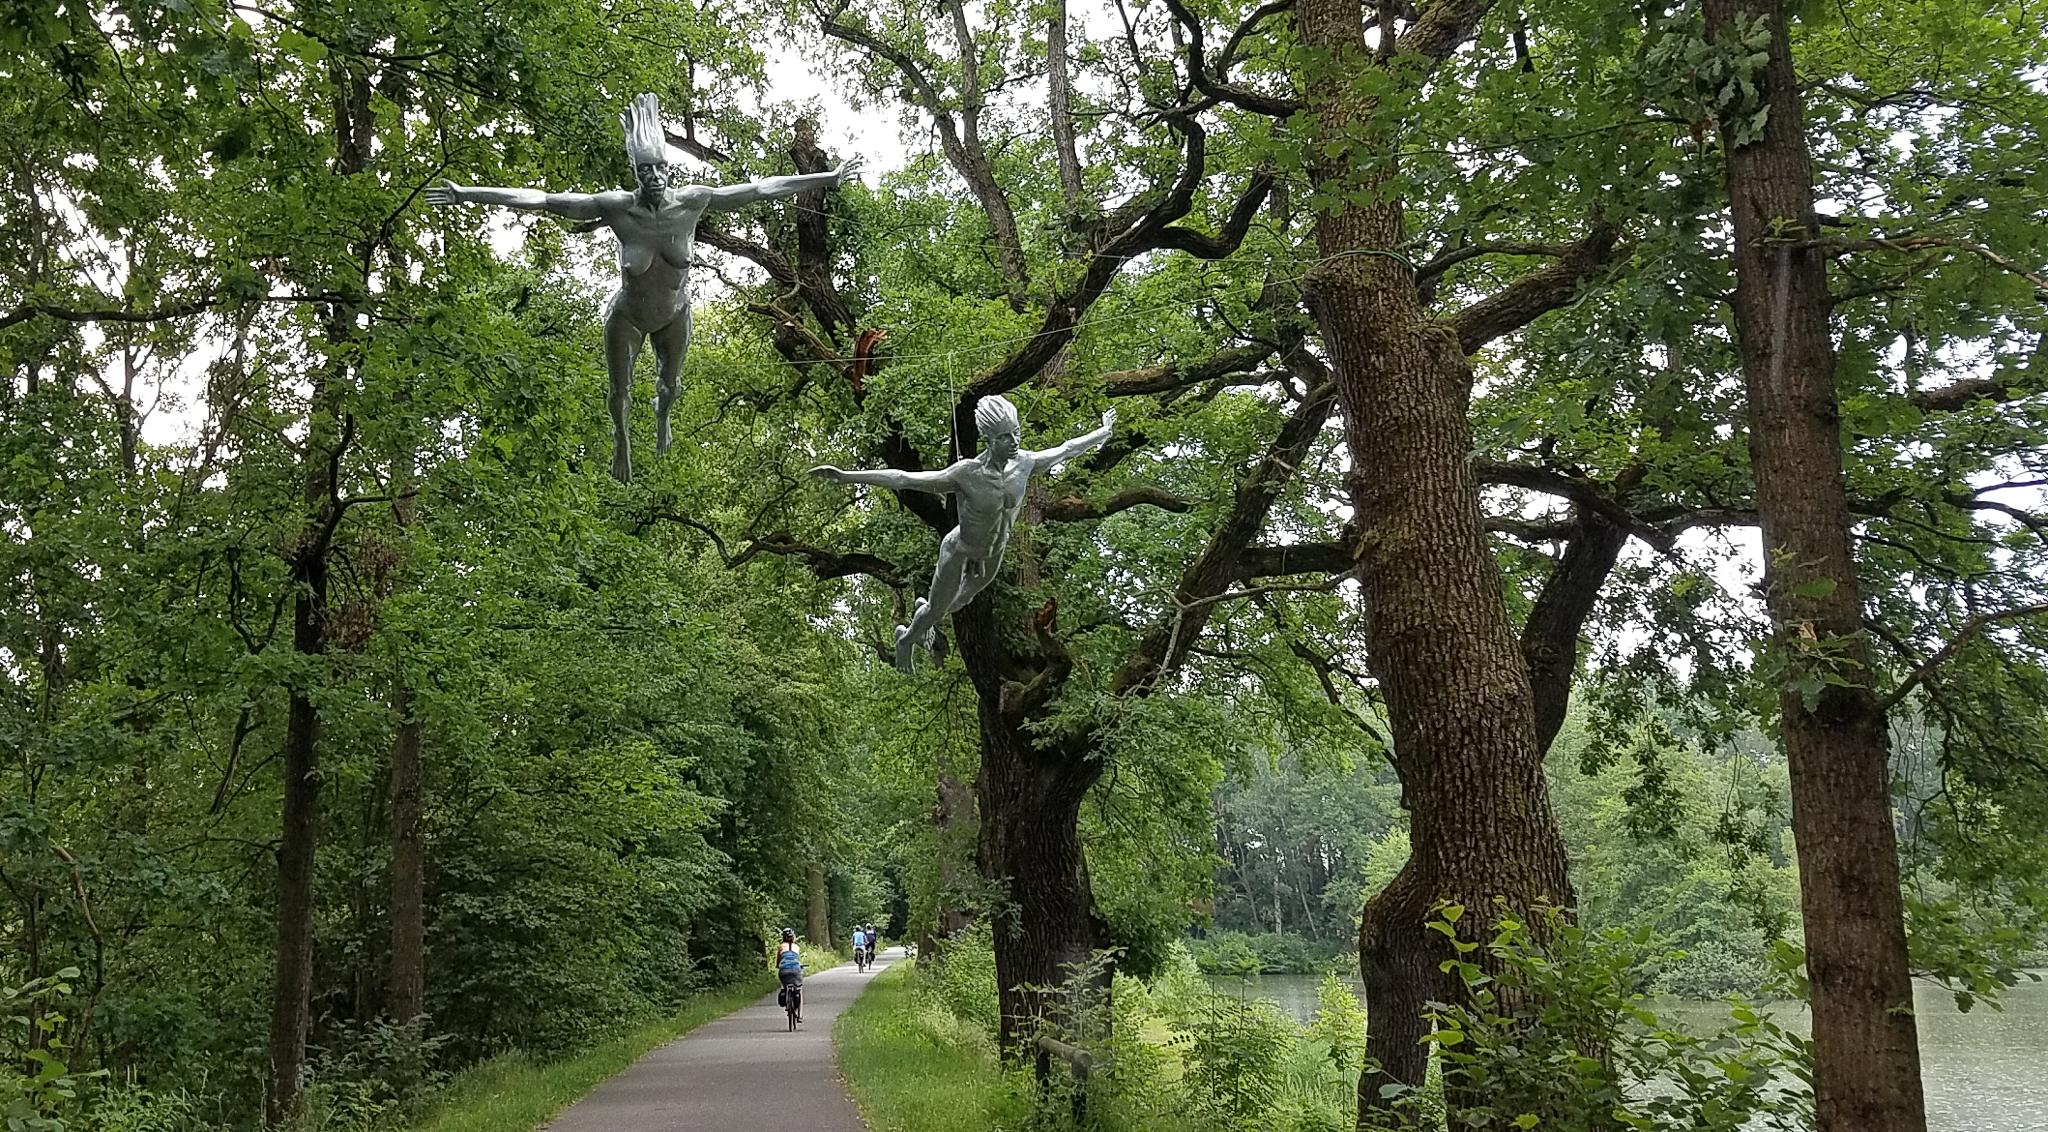 Sculptures flying above the cyclepath